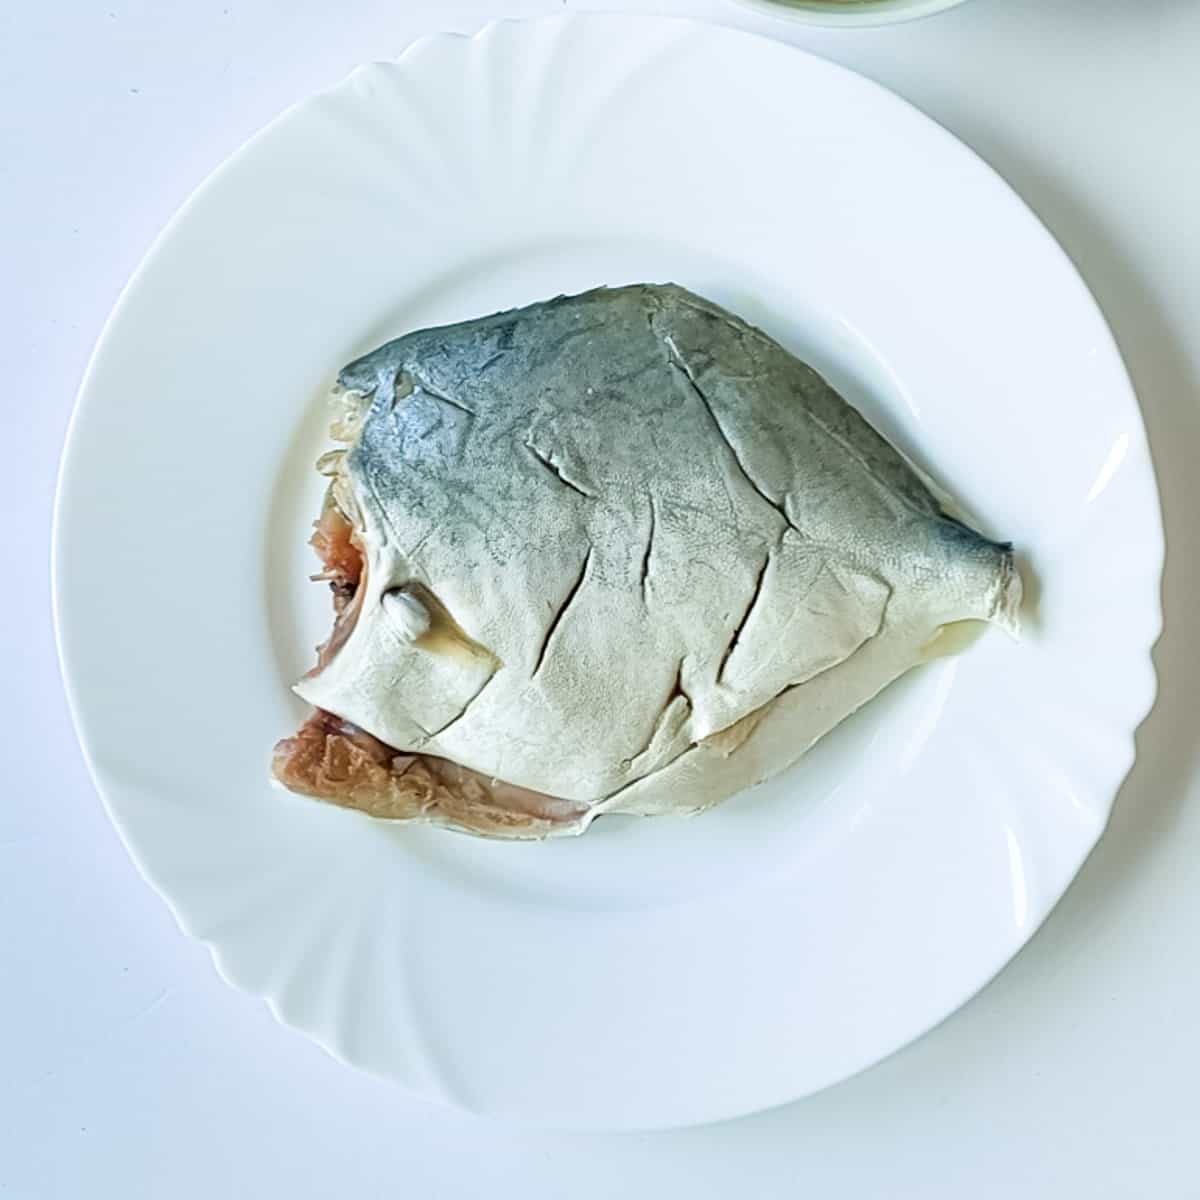 Scored pomfret on a white plate ready to be marinated.